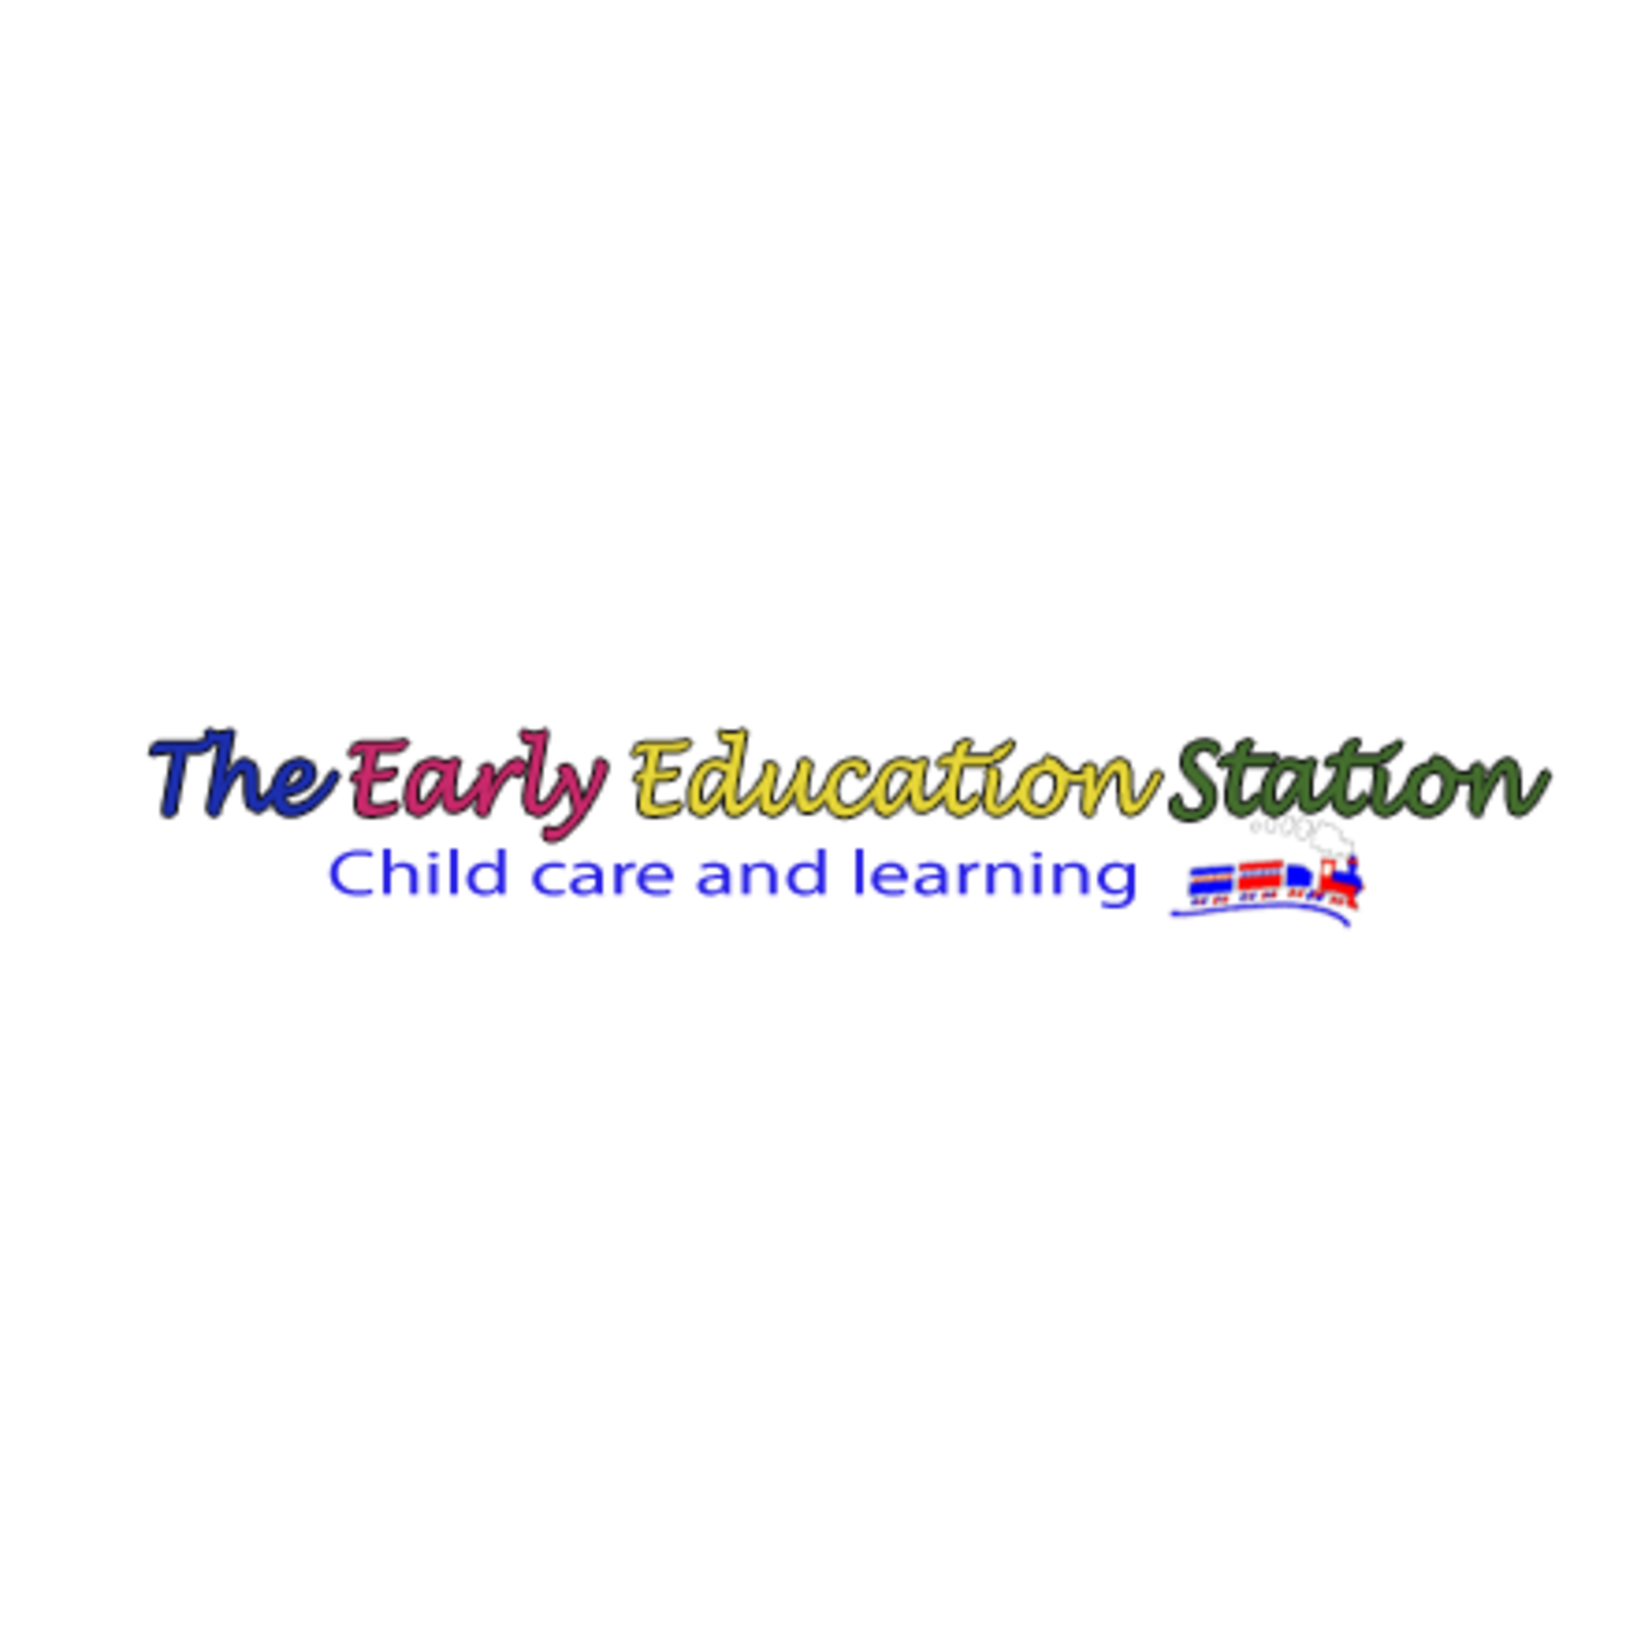 Early Education Station-West Dundee Early Education Station-West Dundee - Child care - $200.00